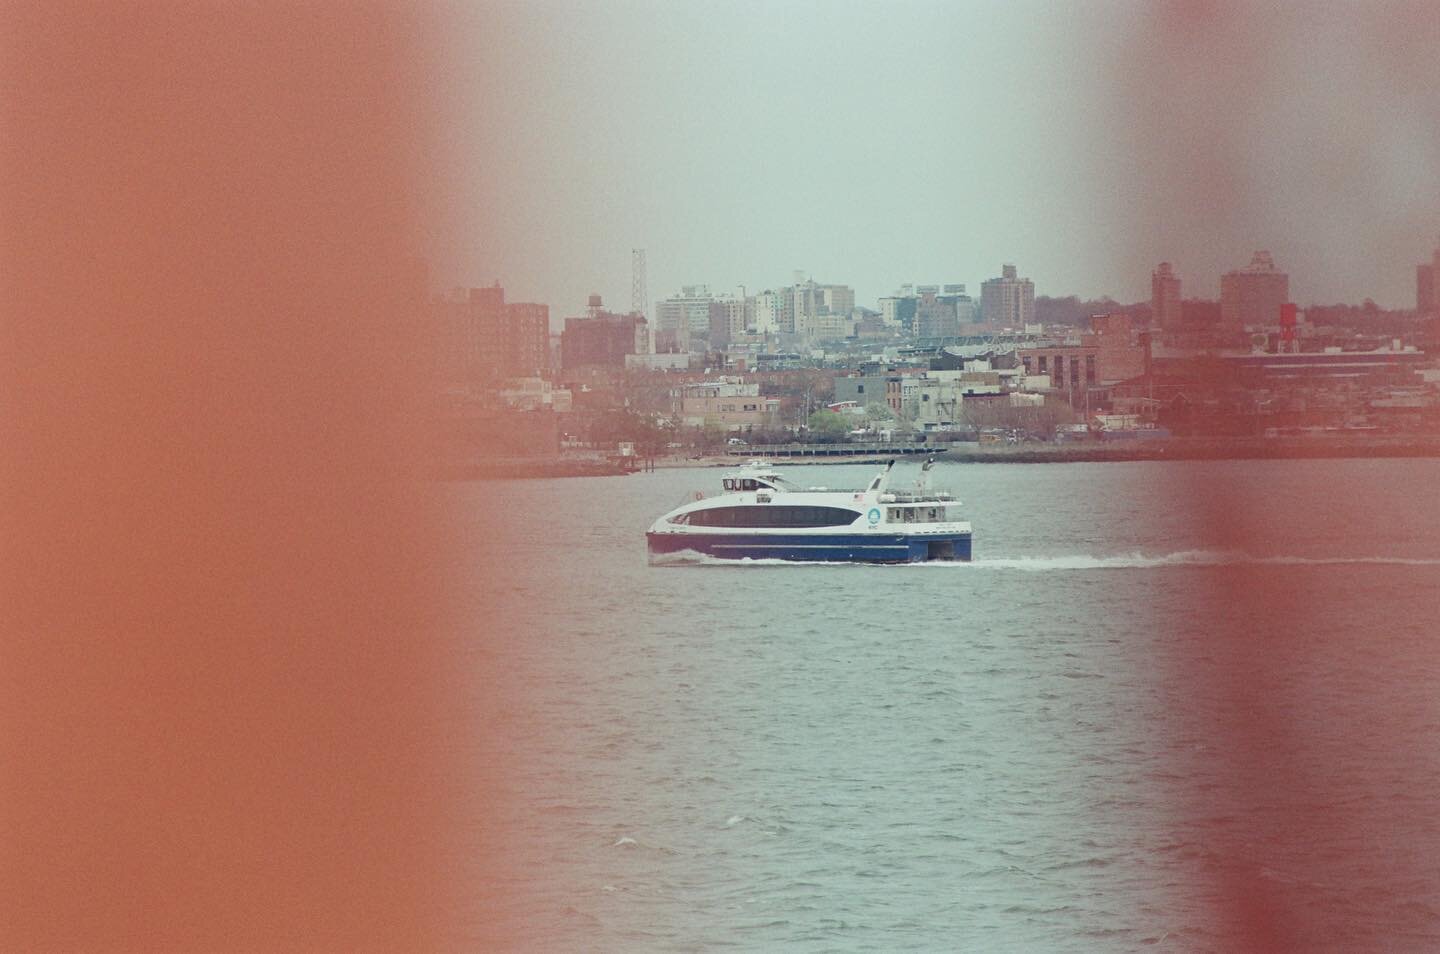 Boats boats boats. 1-4?
.
.
.
@fujifilm_profilm 200
Dev and scan: @contactphotolabnyc 
.
.
.
.
.
.
.
.
.
.
.
.
.
#minoltagang #filmphotography #nycspc #filmisnotdead #spicollective #timeoutnewyork #analogphotography #filmcommunity #ferriesonfilm  #is